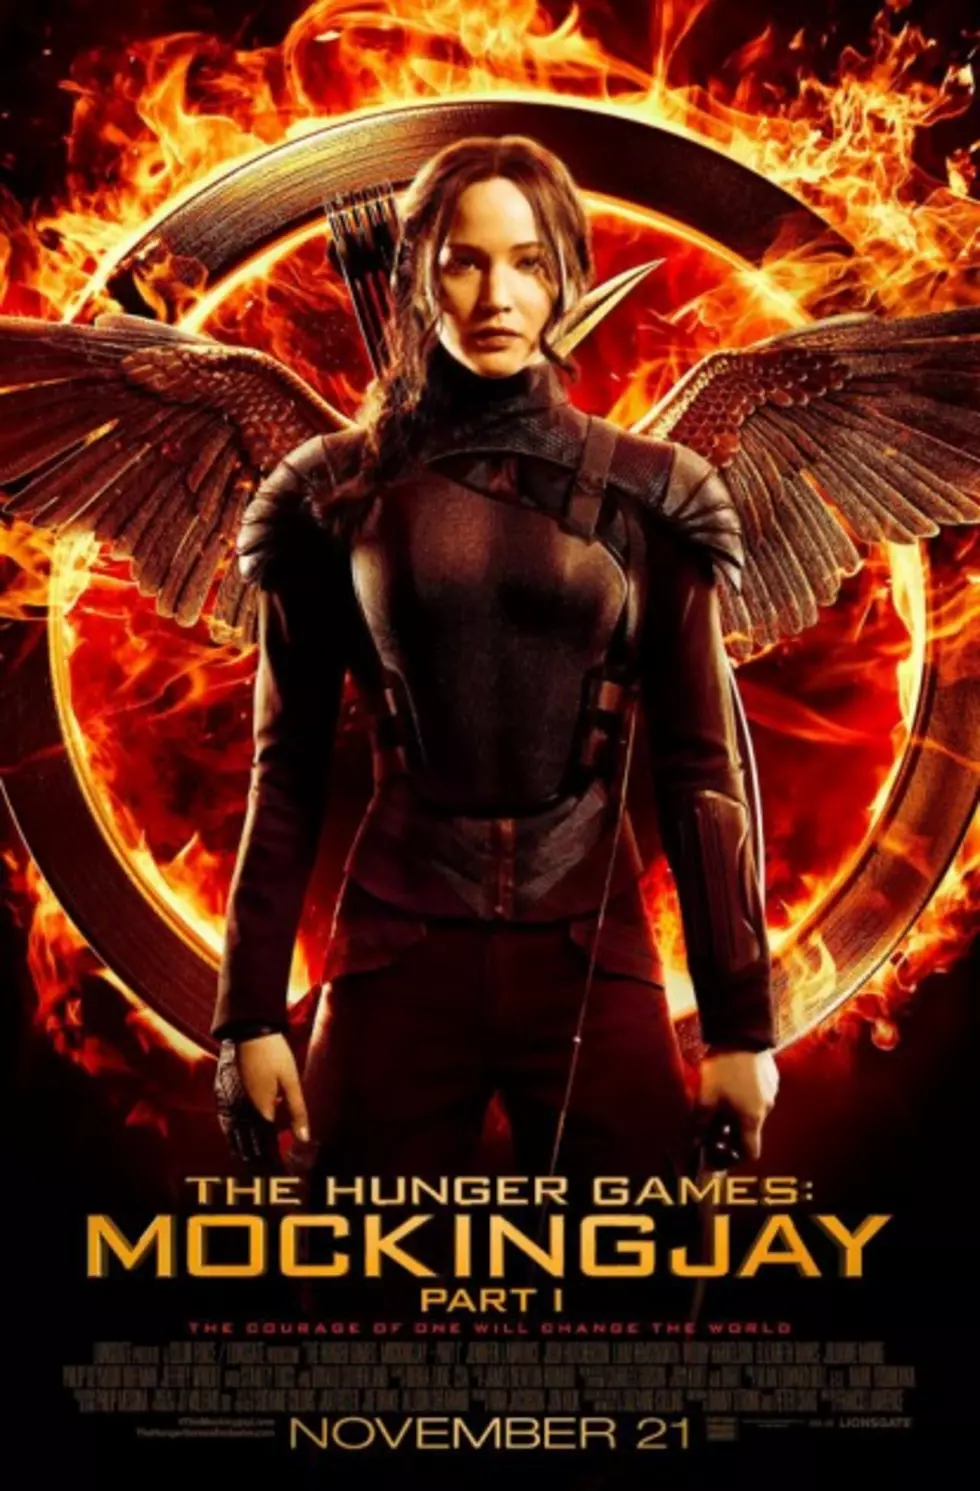 Just $10 and You Could Meet Jennifer Lawrence at the Mockingjay Premiere